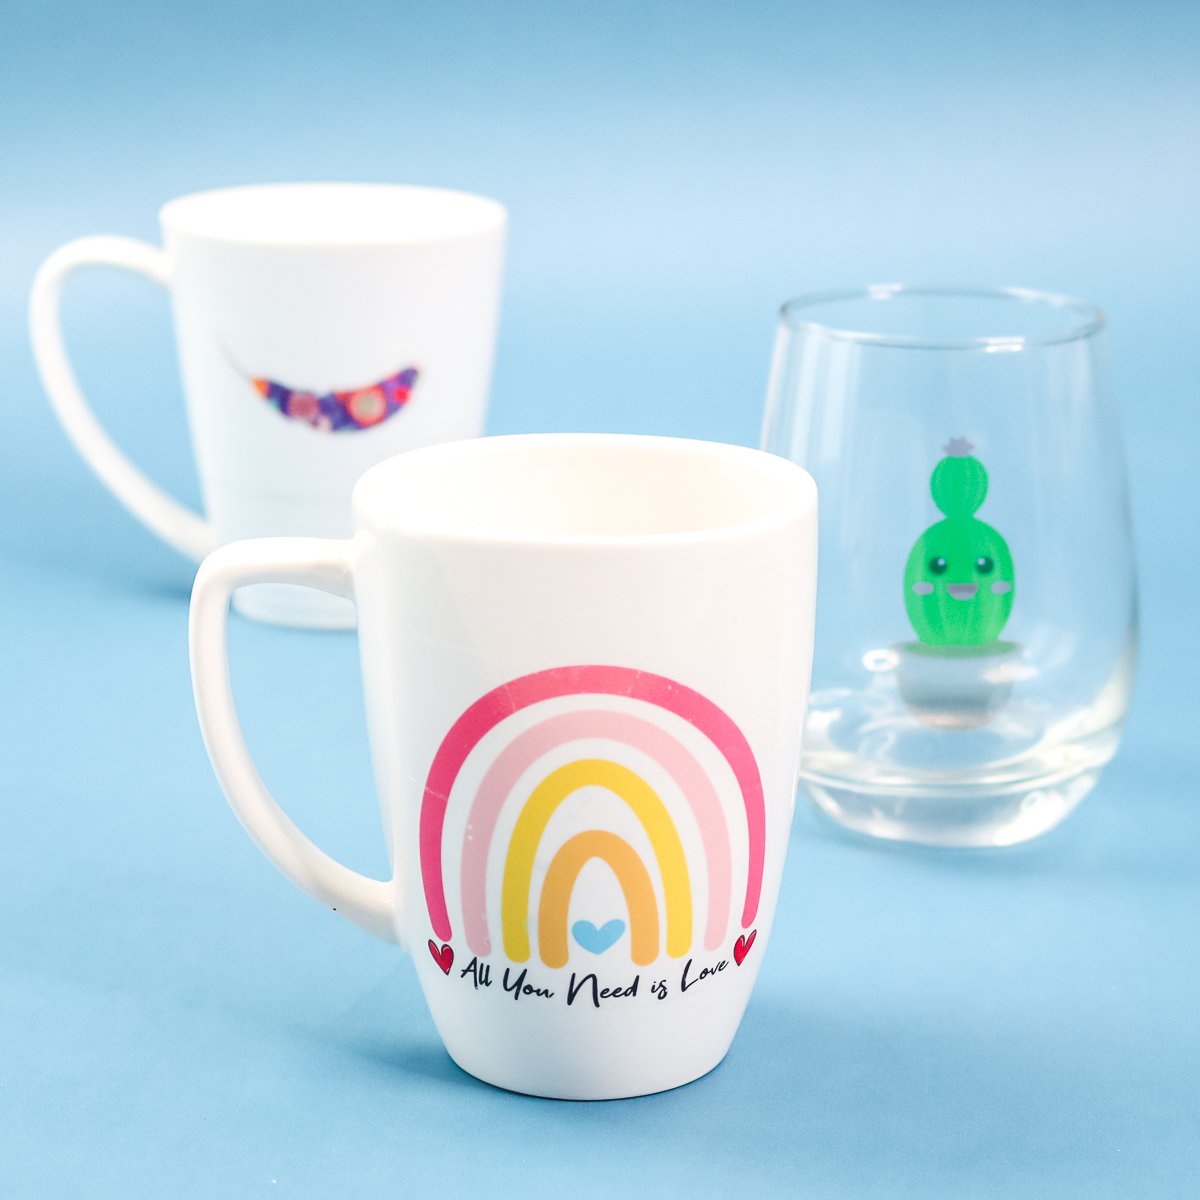 Waterslide Decals for Tumblers, Mugs, and Glasses  Want to know to secret  to personalizing tumblers, mugs, and glasses with full color decals you  print at home but look like AMAZING? Watch